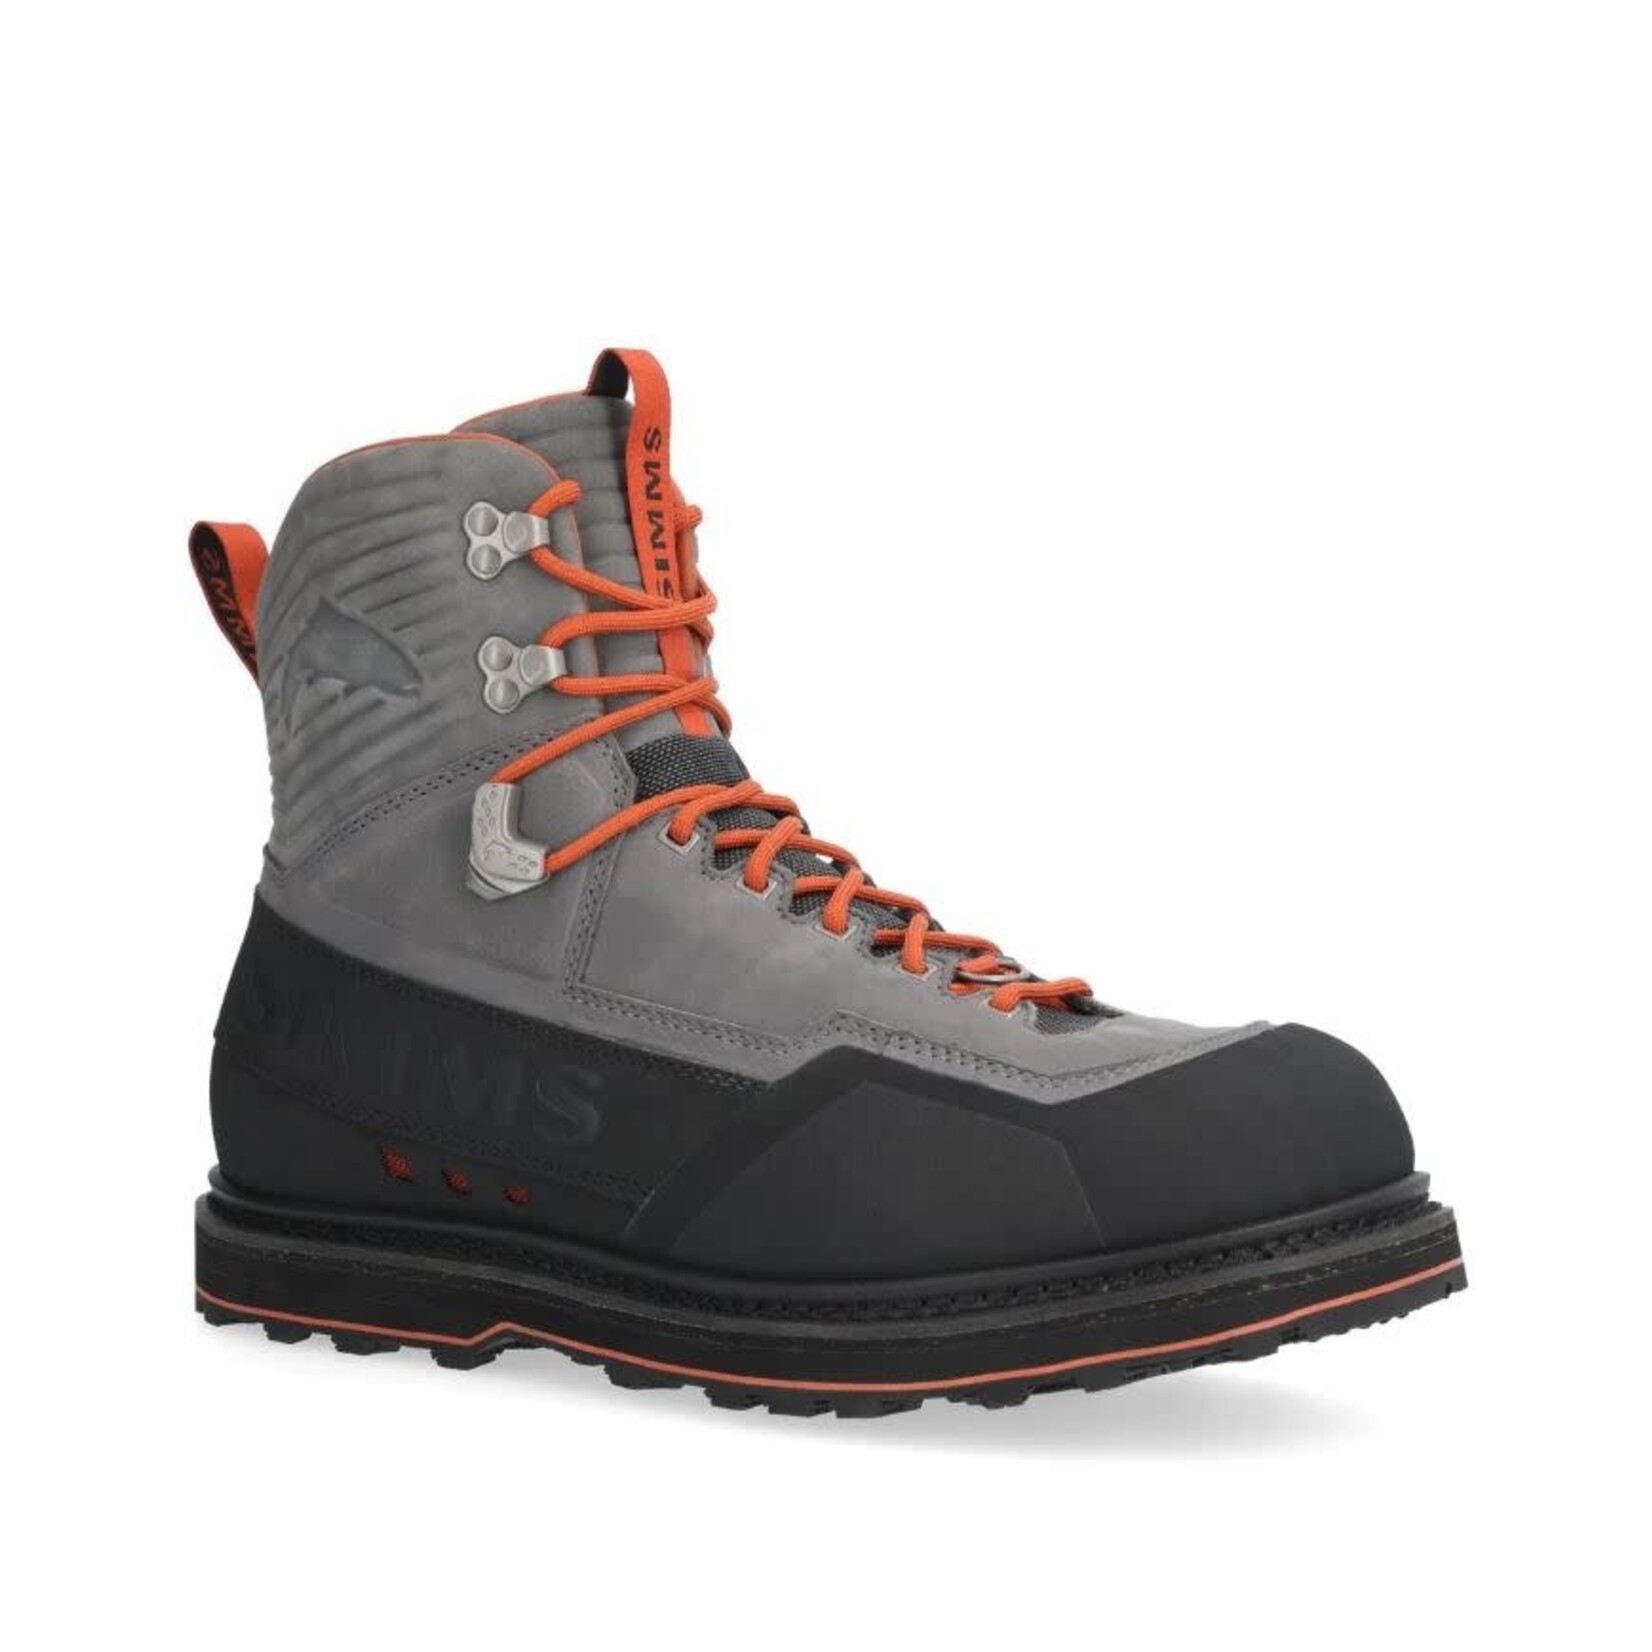 simms Simms G3 Guide Wading Boots-Vibram